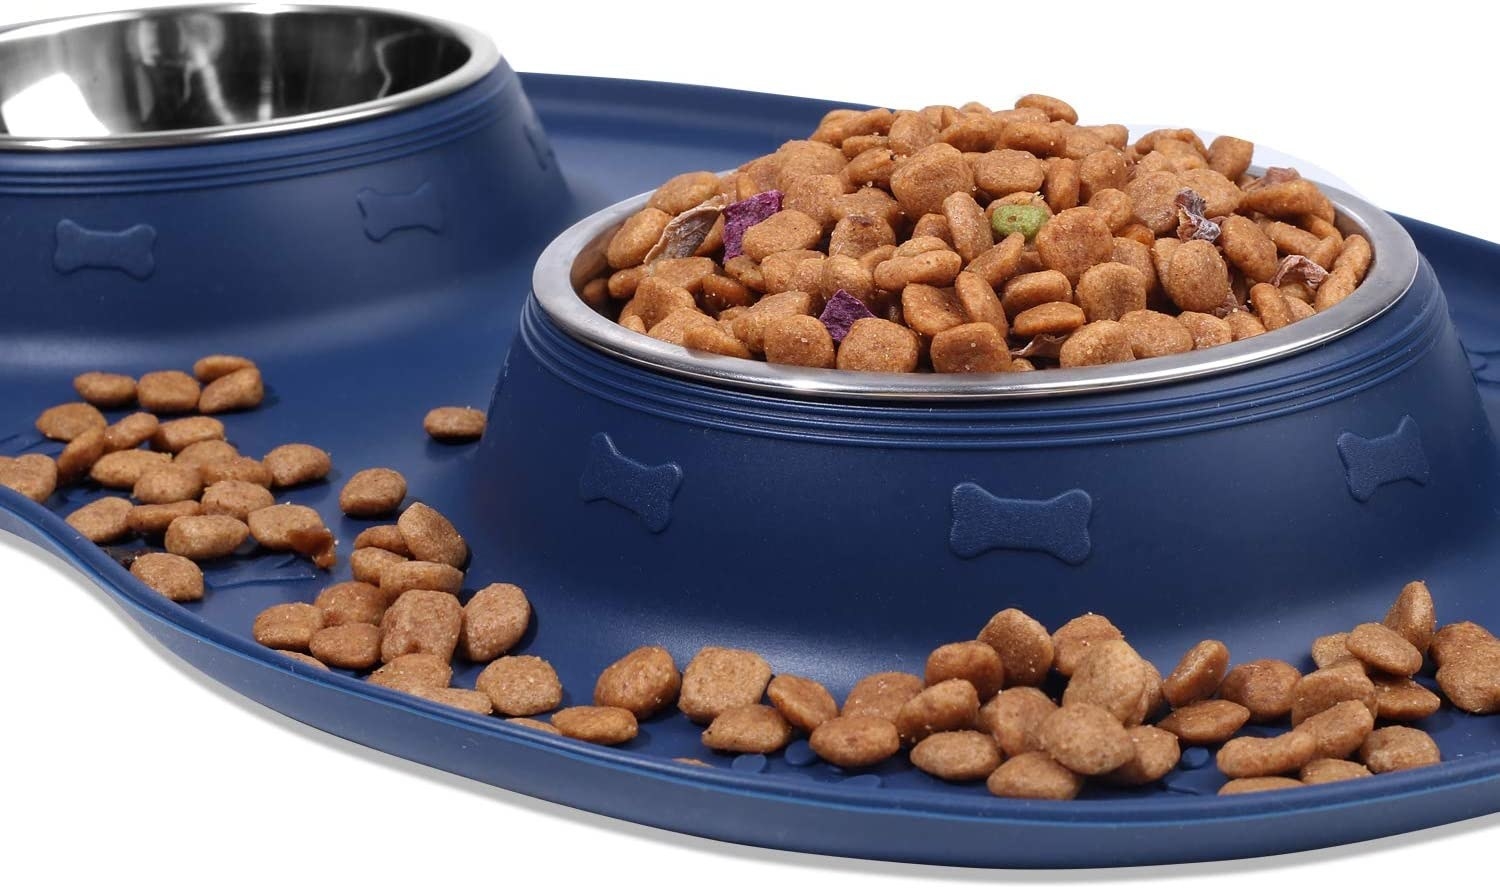 The bowl and mat set with kibble filling both the bowl and spilt on the mat